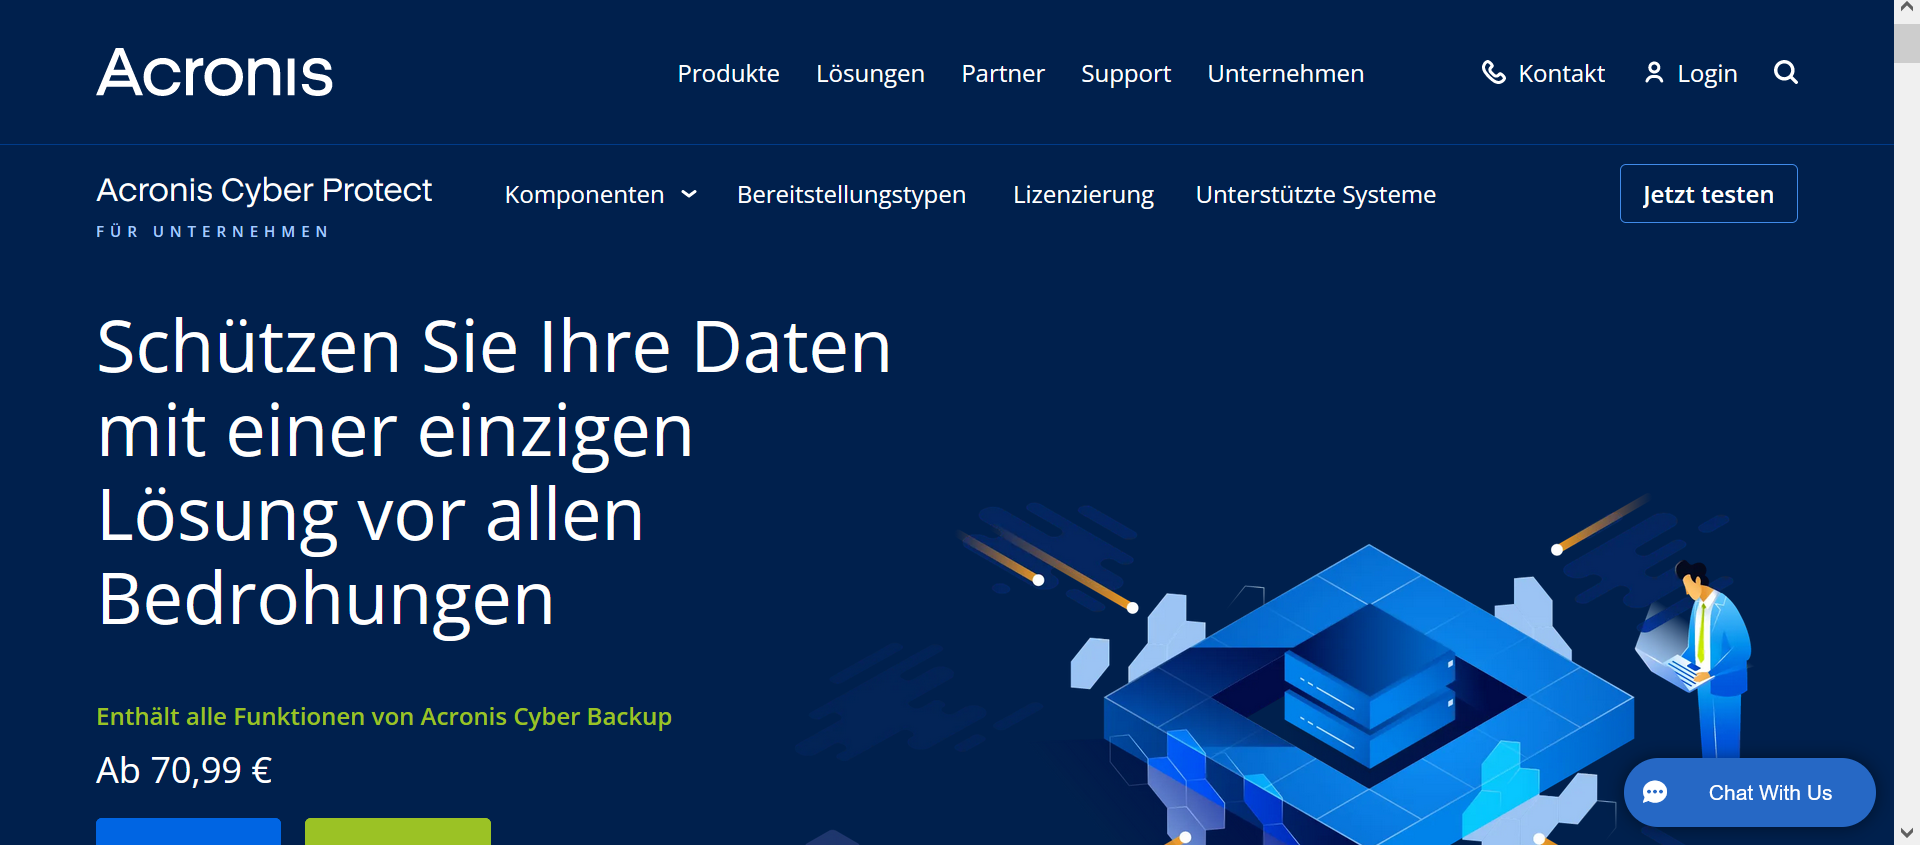 Acronis Cyber Protect Home Office: Dashboard und Funktionen